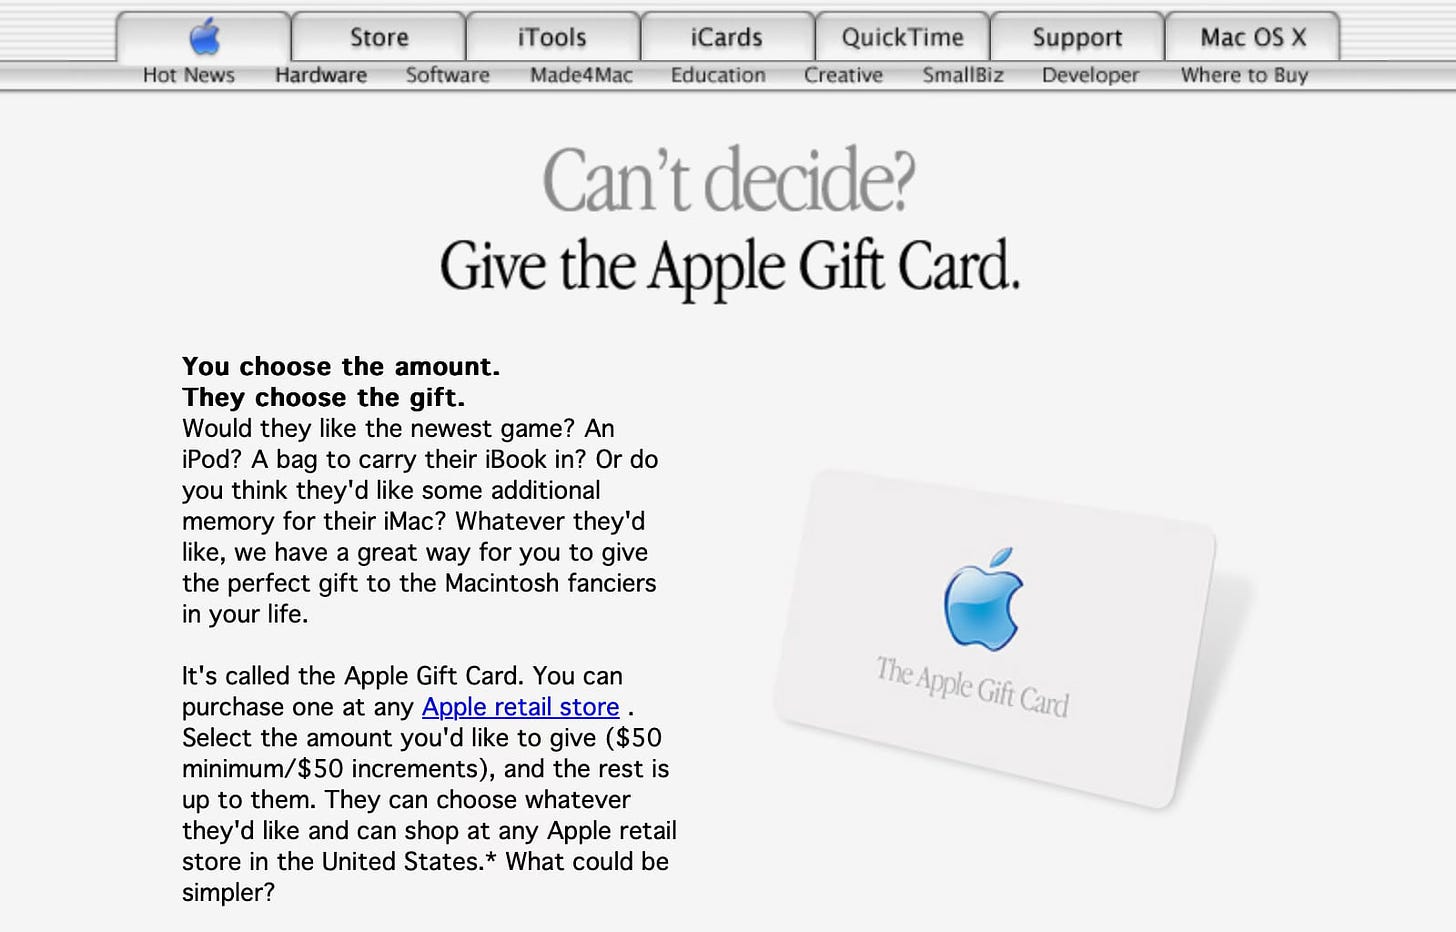 A screenshot of the Apple Gift Card webpage in 2001.